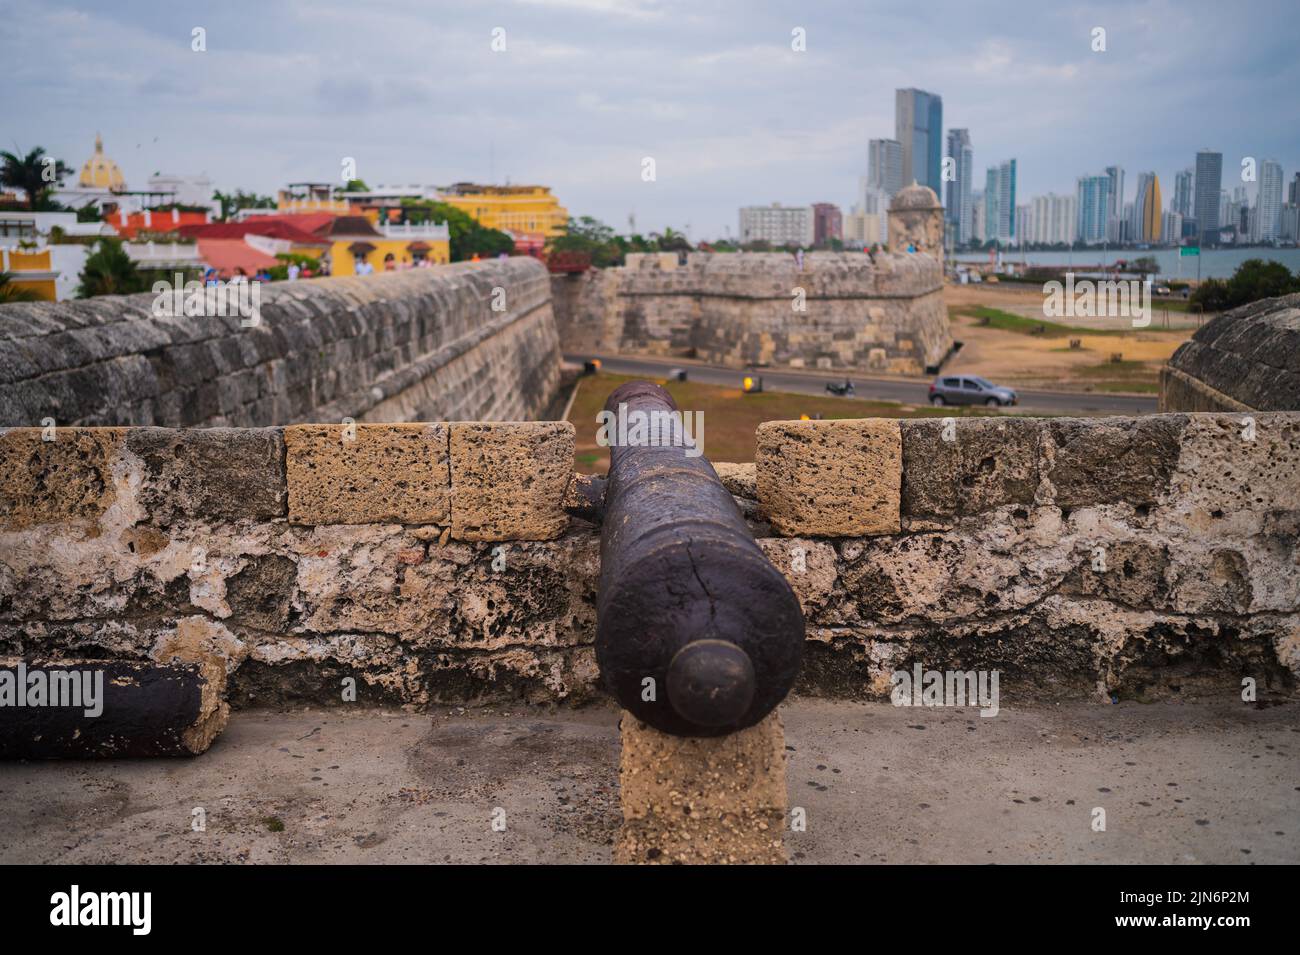 View of Bocagrande skyline from atop the old city walls of Cartagena de Indias, Colombia Stock Photo